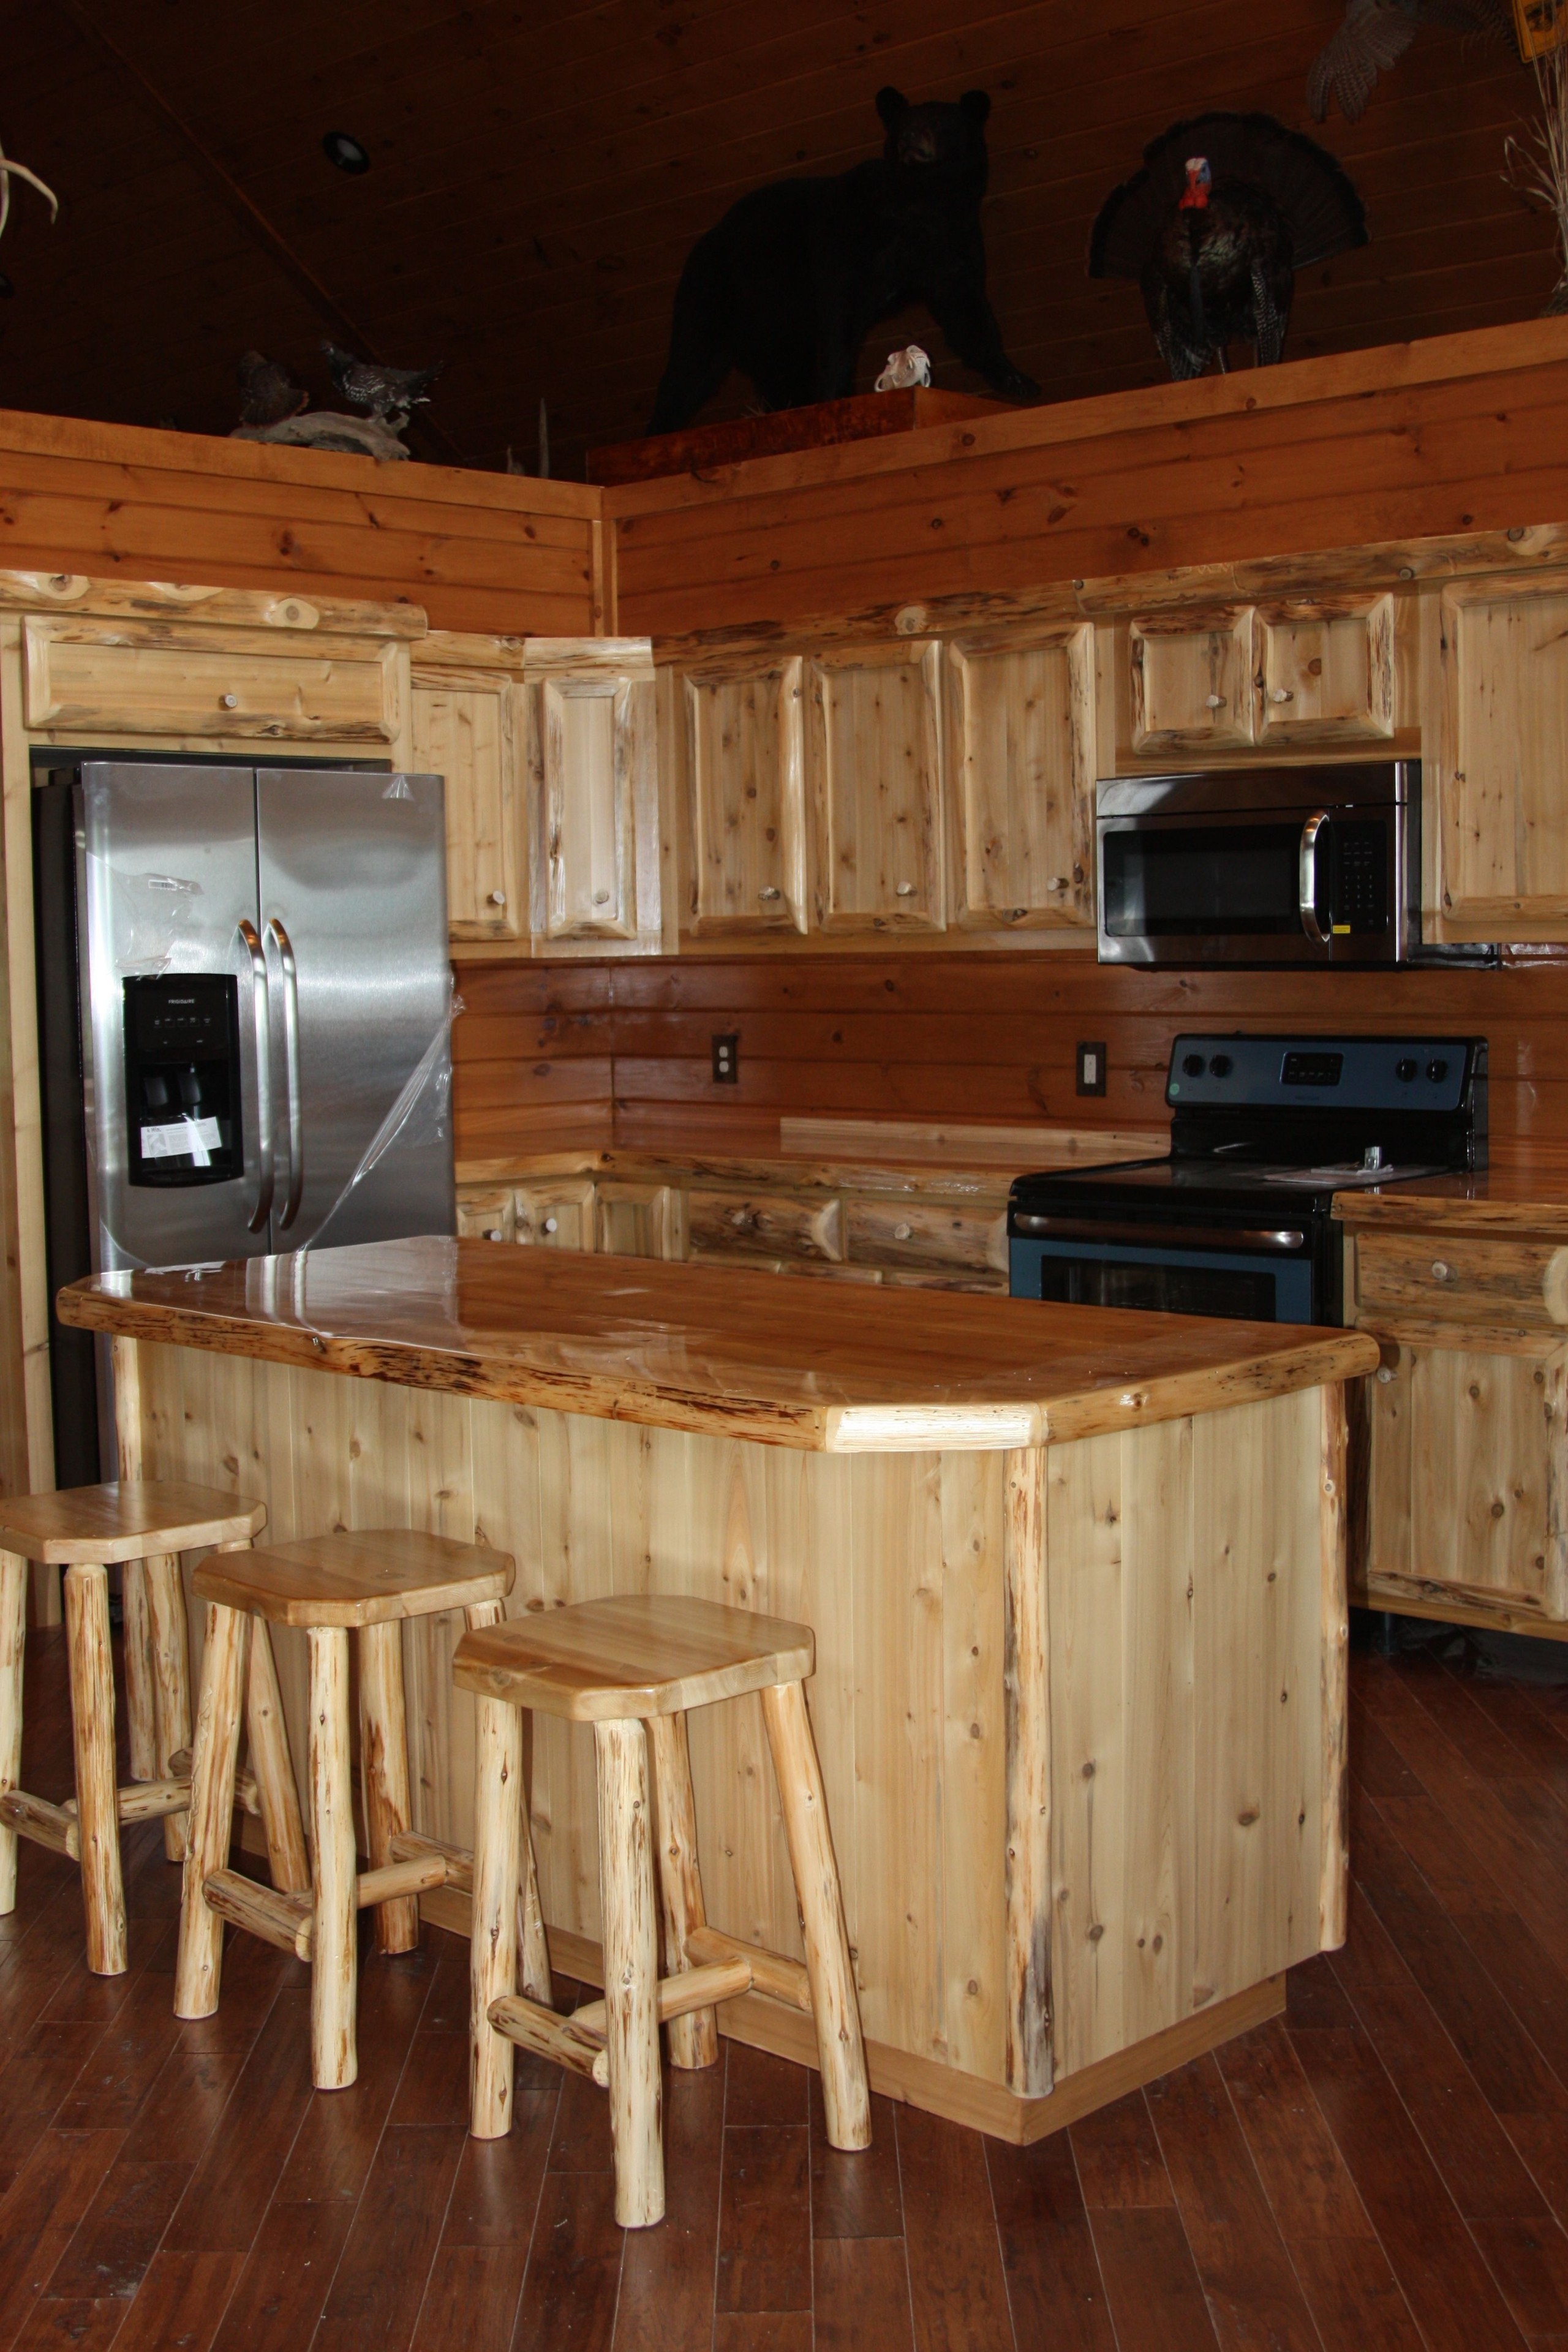 Hand crafted custom rustic cedar kitchen cabinets by king